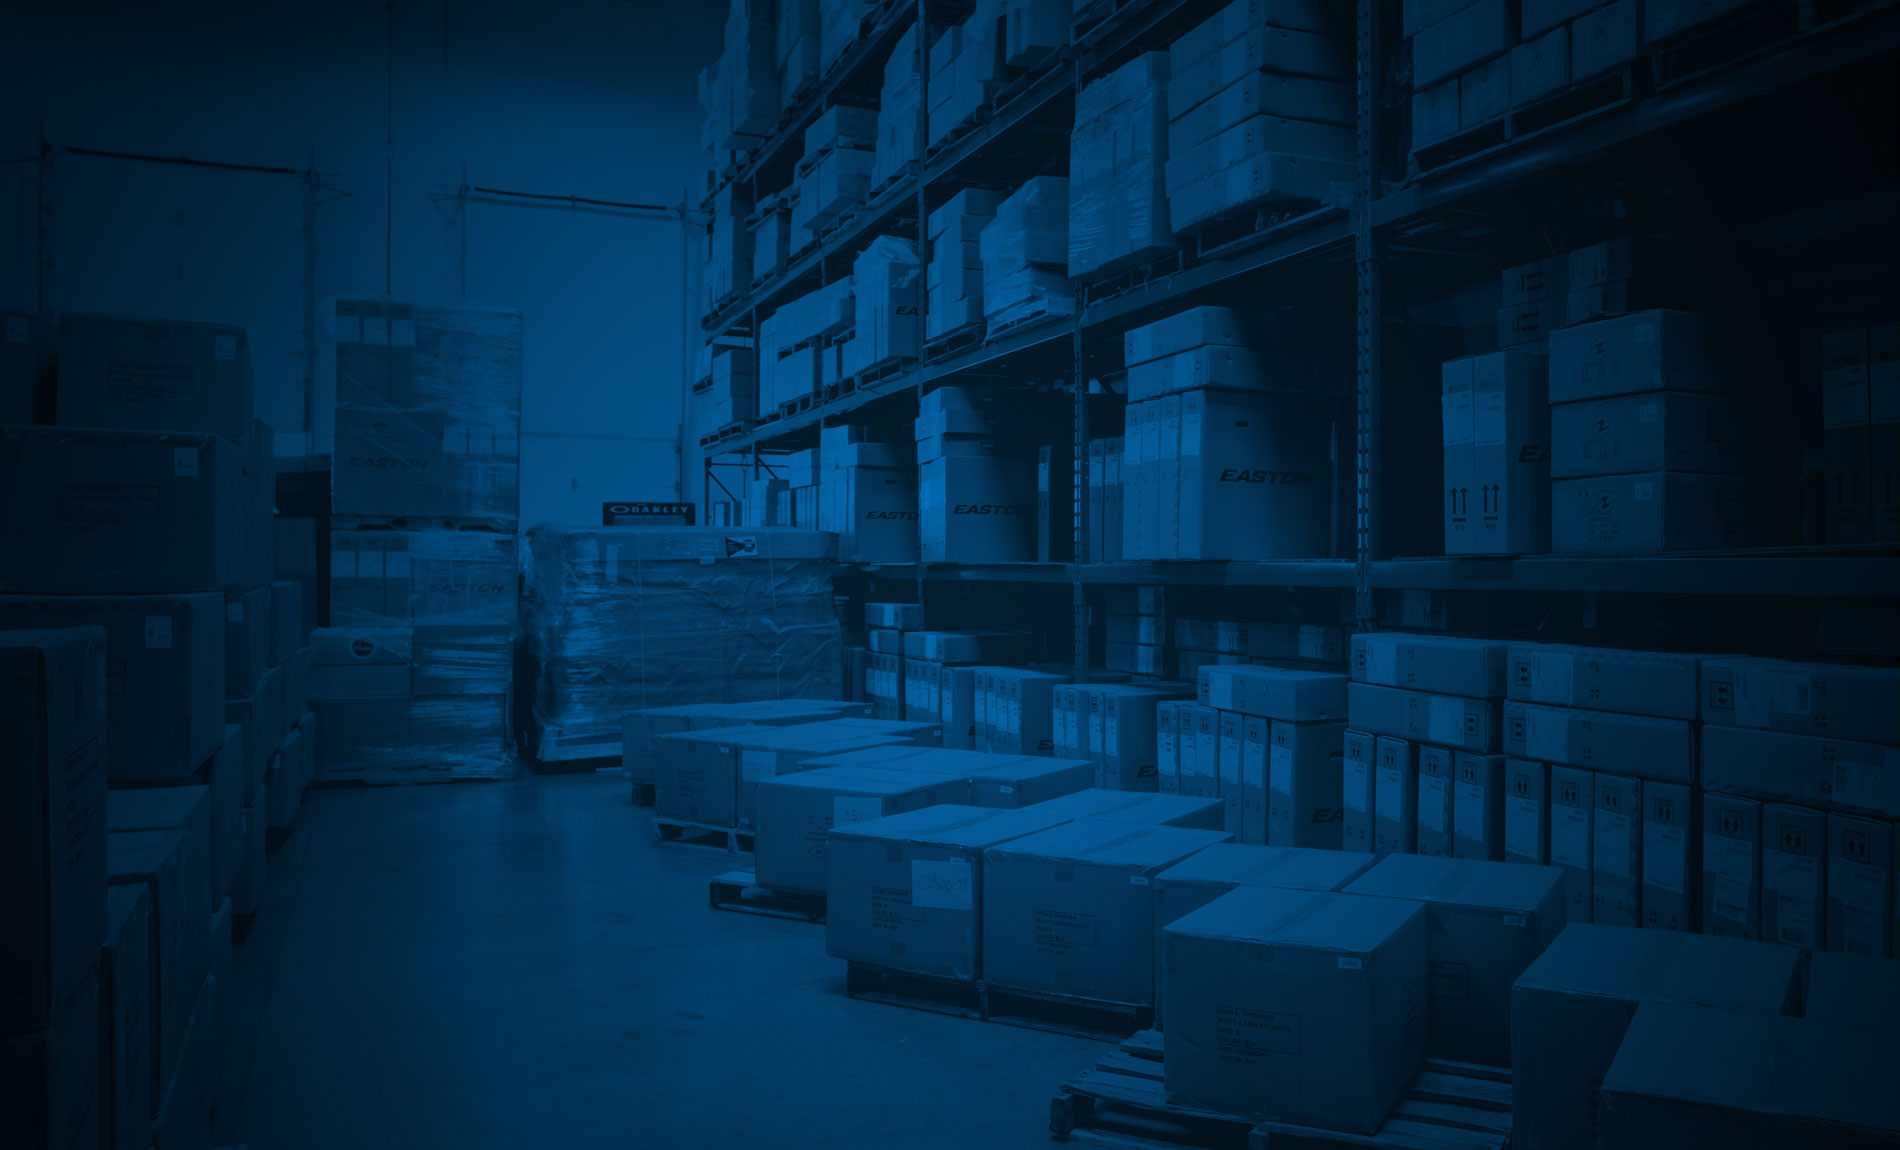 Find a flexible warehousing and distribution solution to keep your business competitive. For more information on these services, call us today at 877-541-1910